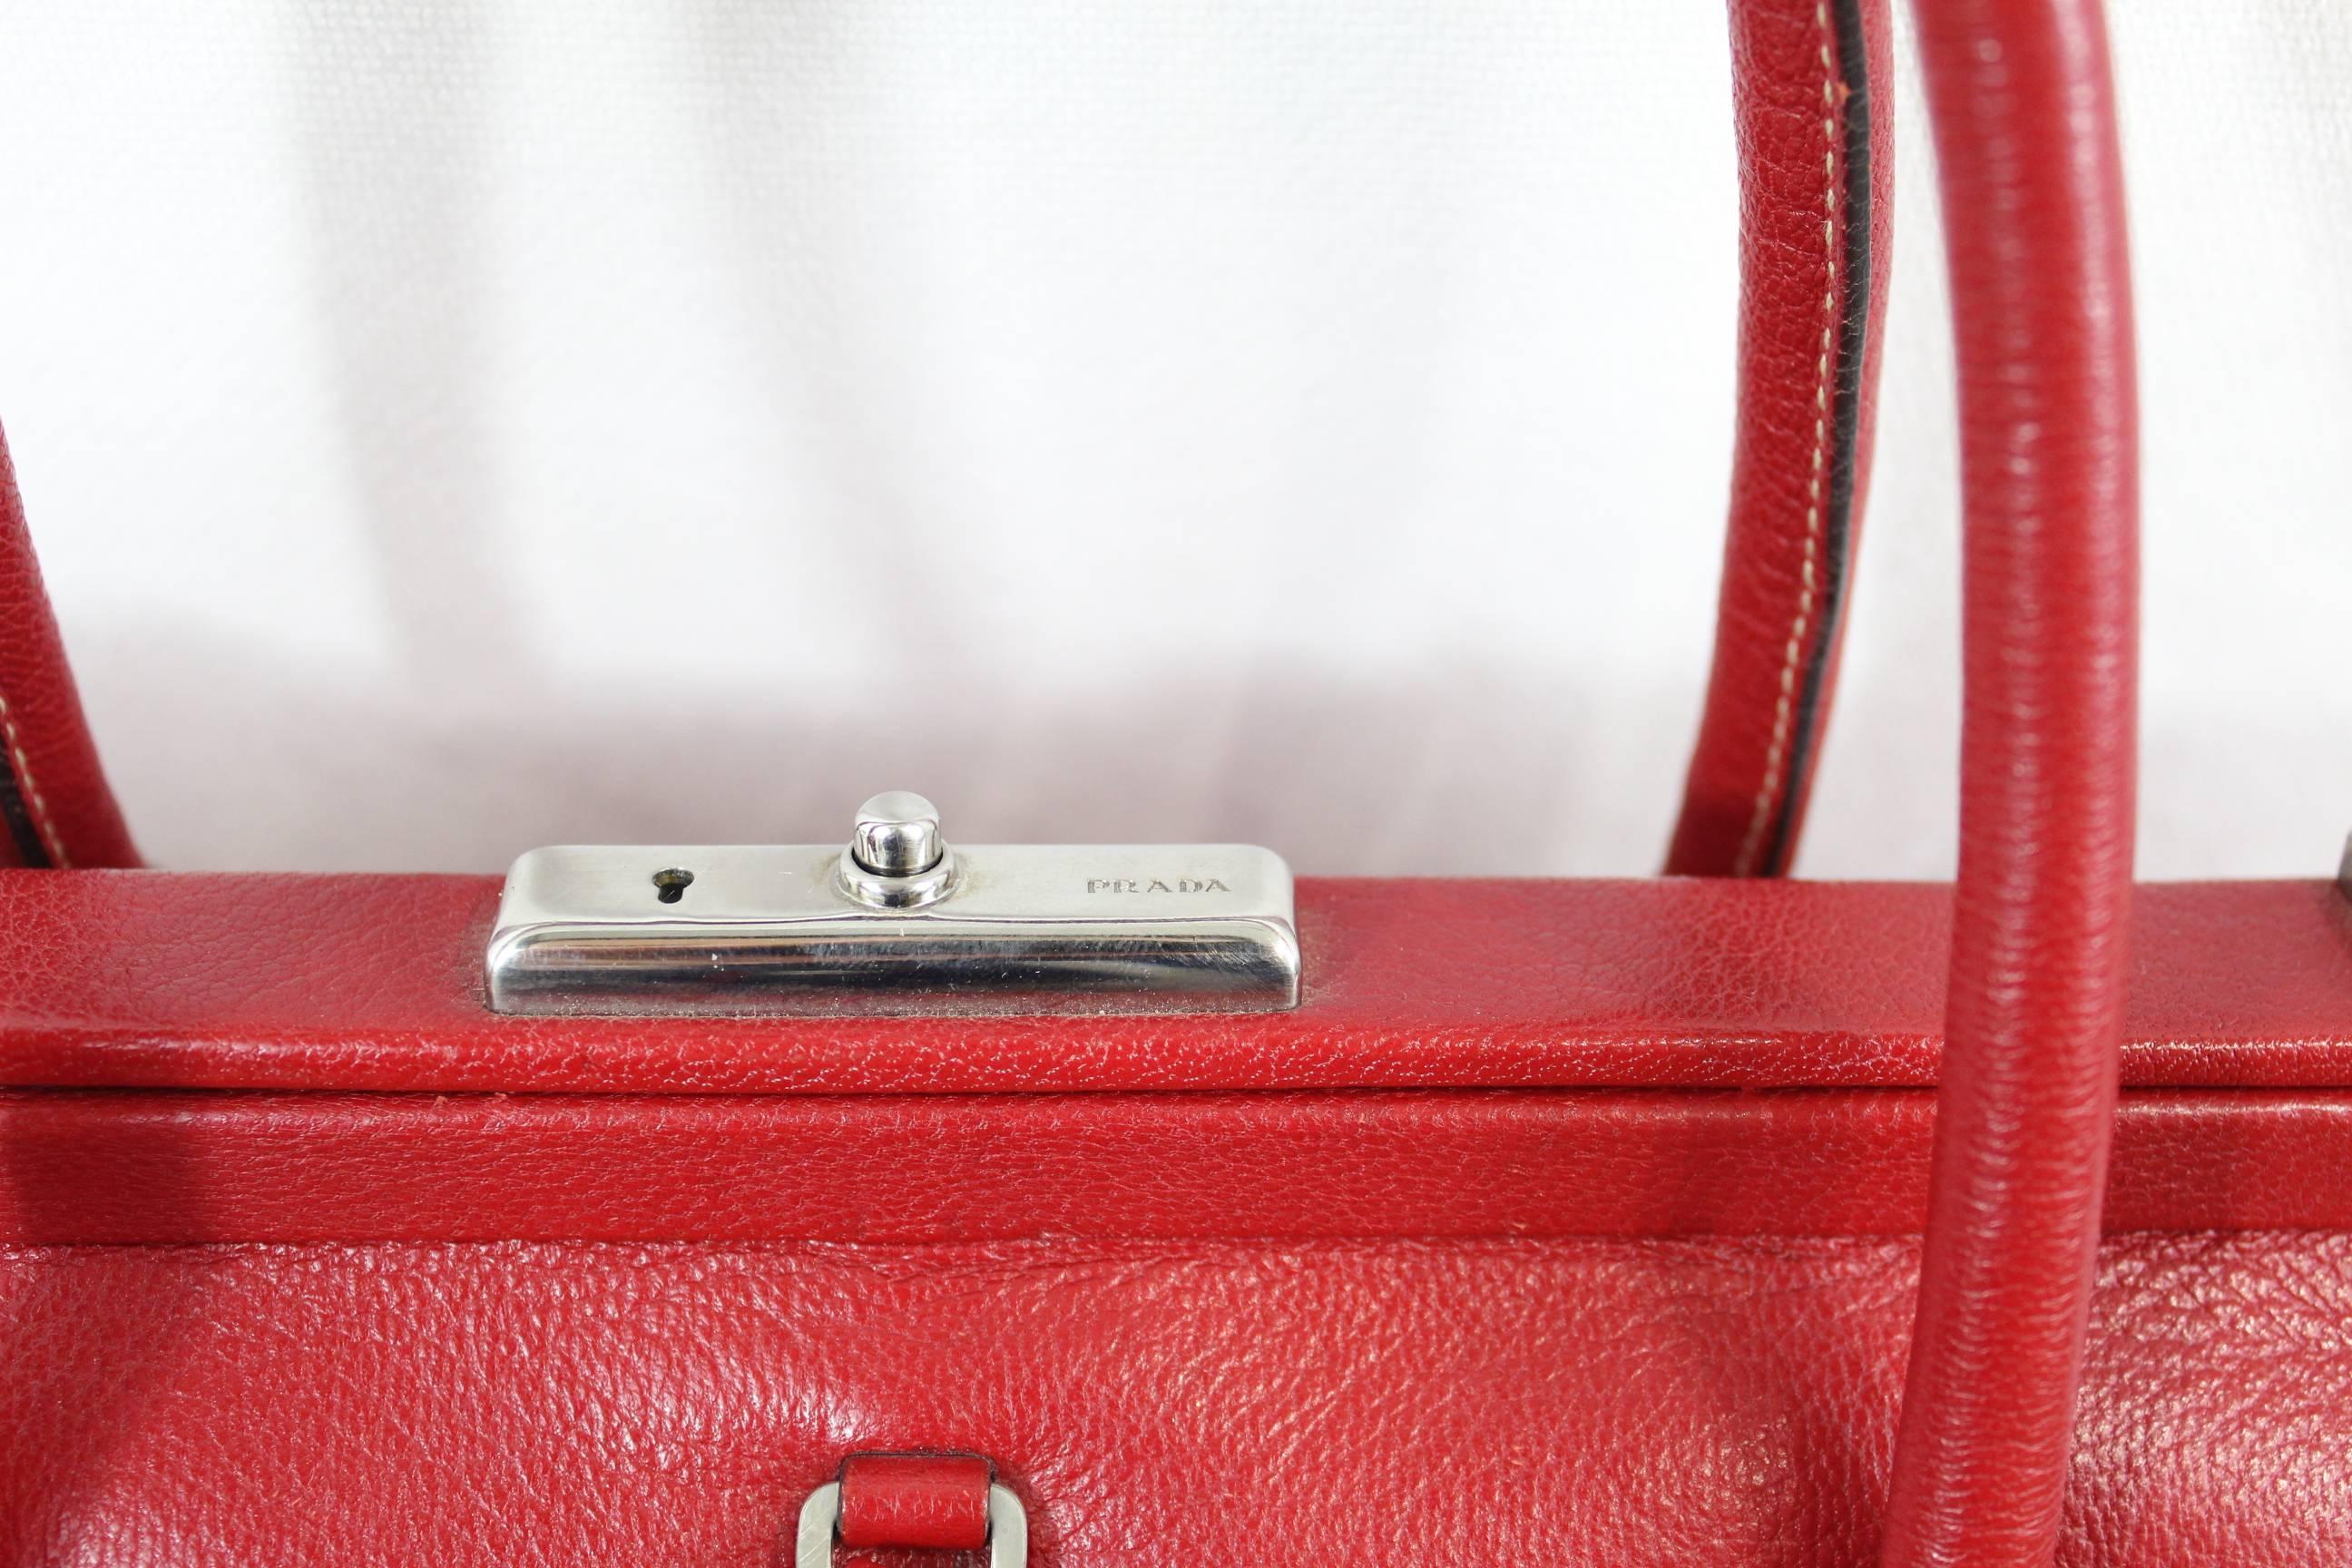 really nice Prada Doctor bag in red leather. With keys.
Some small signs of wear in corners an leather.
Hardware in good condition
Interior really clean.